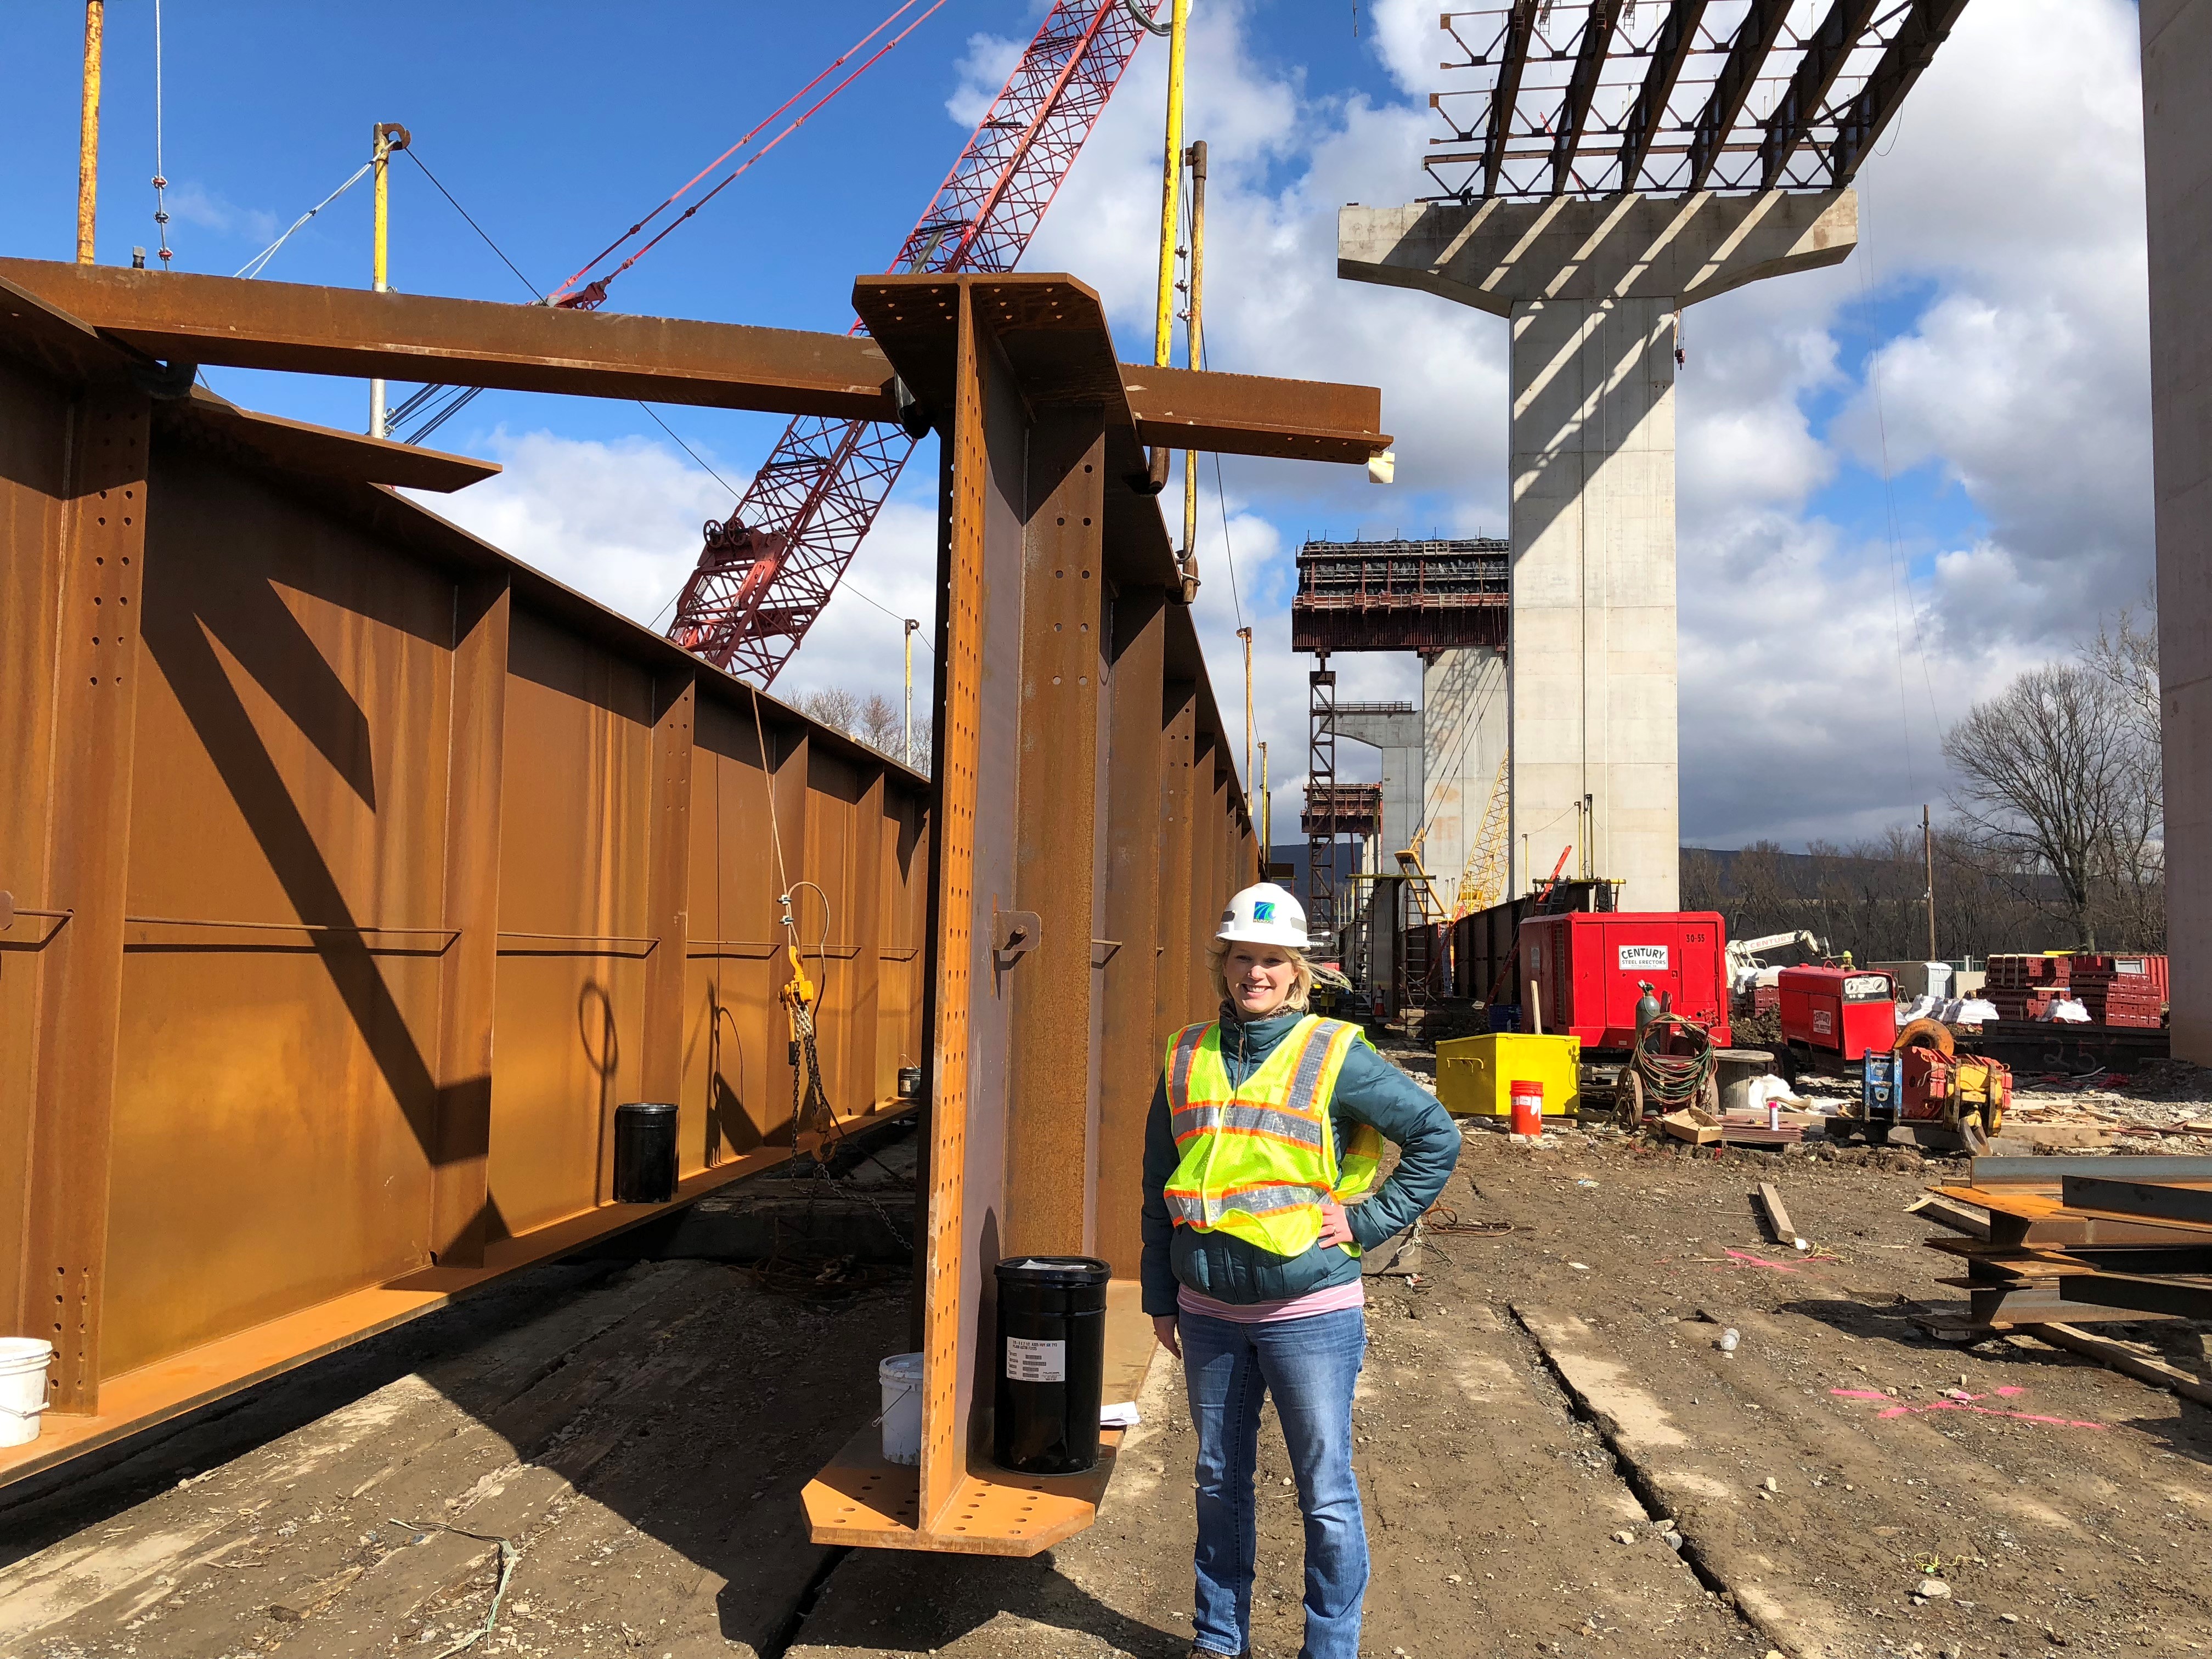 Maggie Jackson standing with construction gear on in front of a large steel bridge beam.